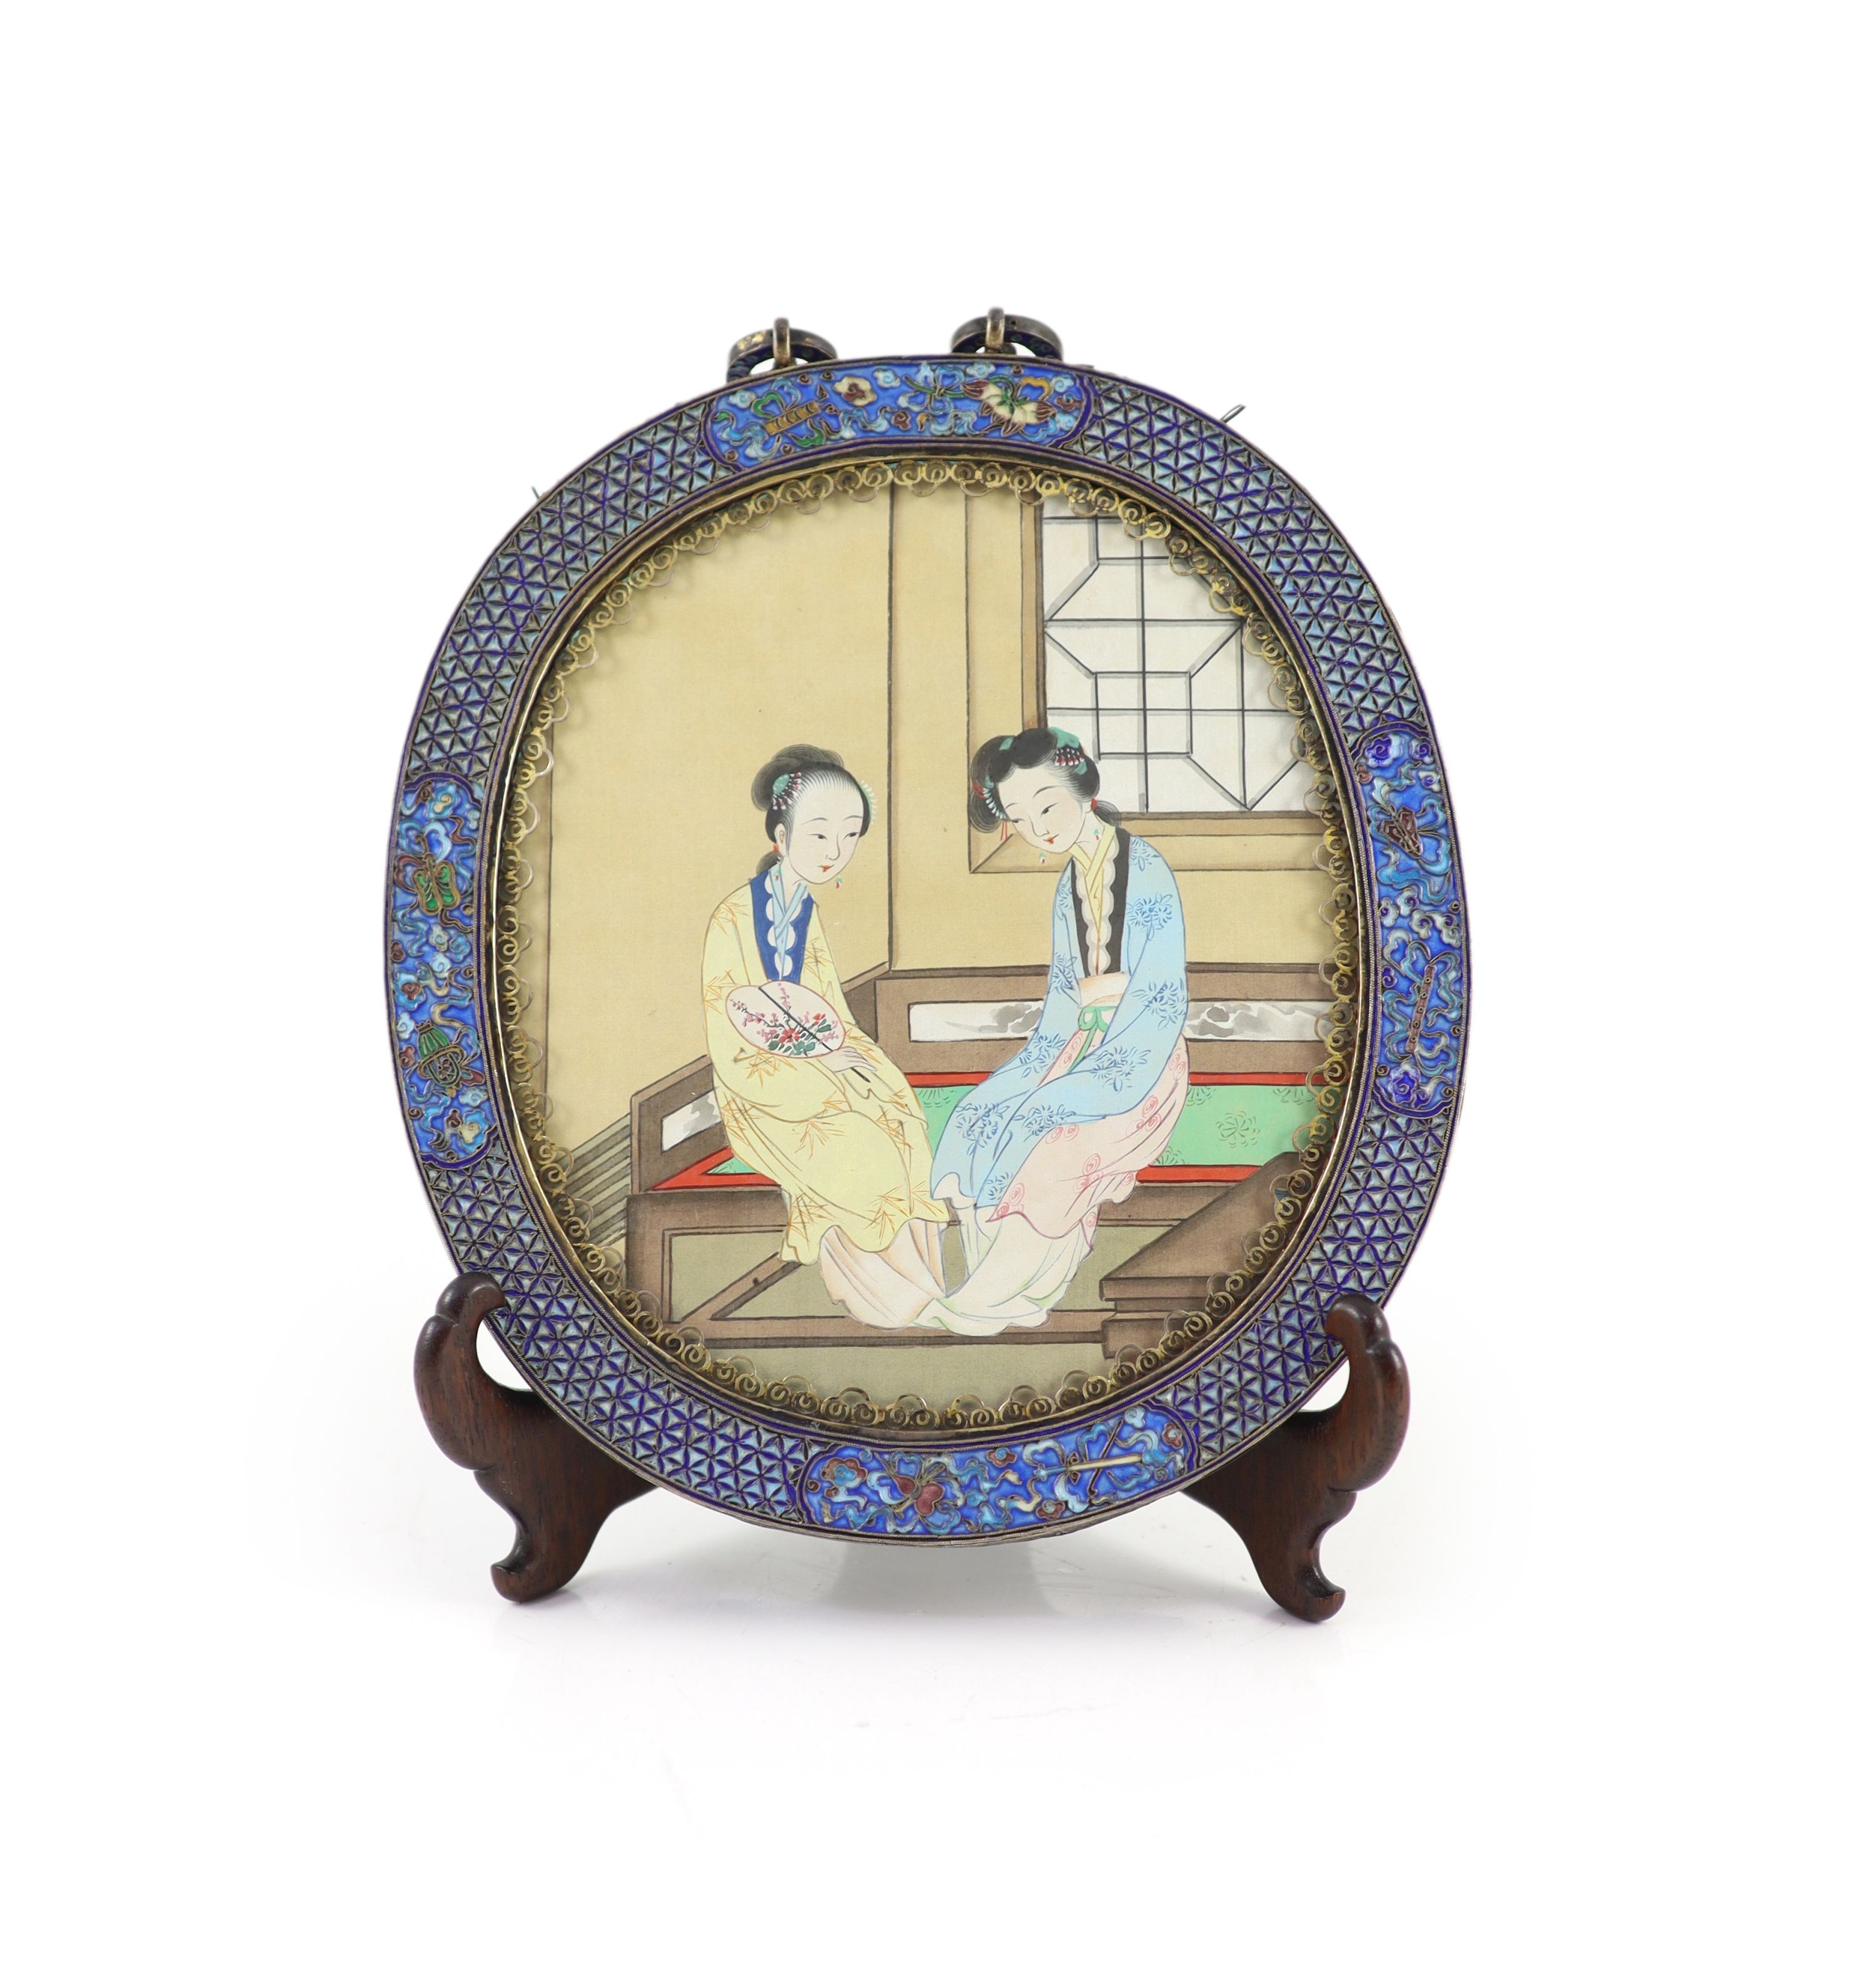 A Chinese white metal cloisonné enamel and gem set wall mirror, mid 20th century, 29.5cm to suspension loop 22.5cm wide, wood stand